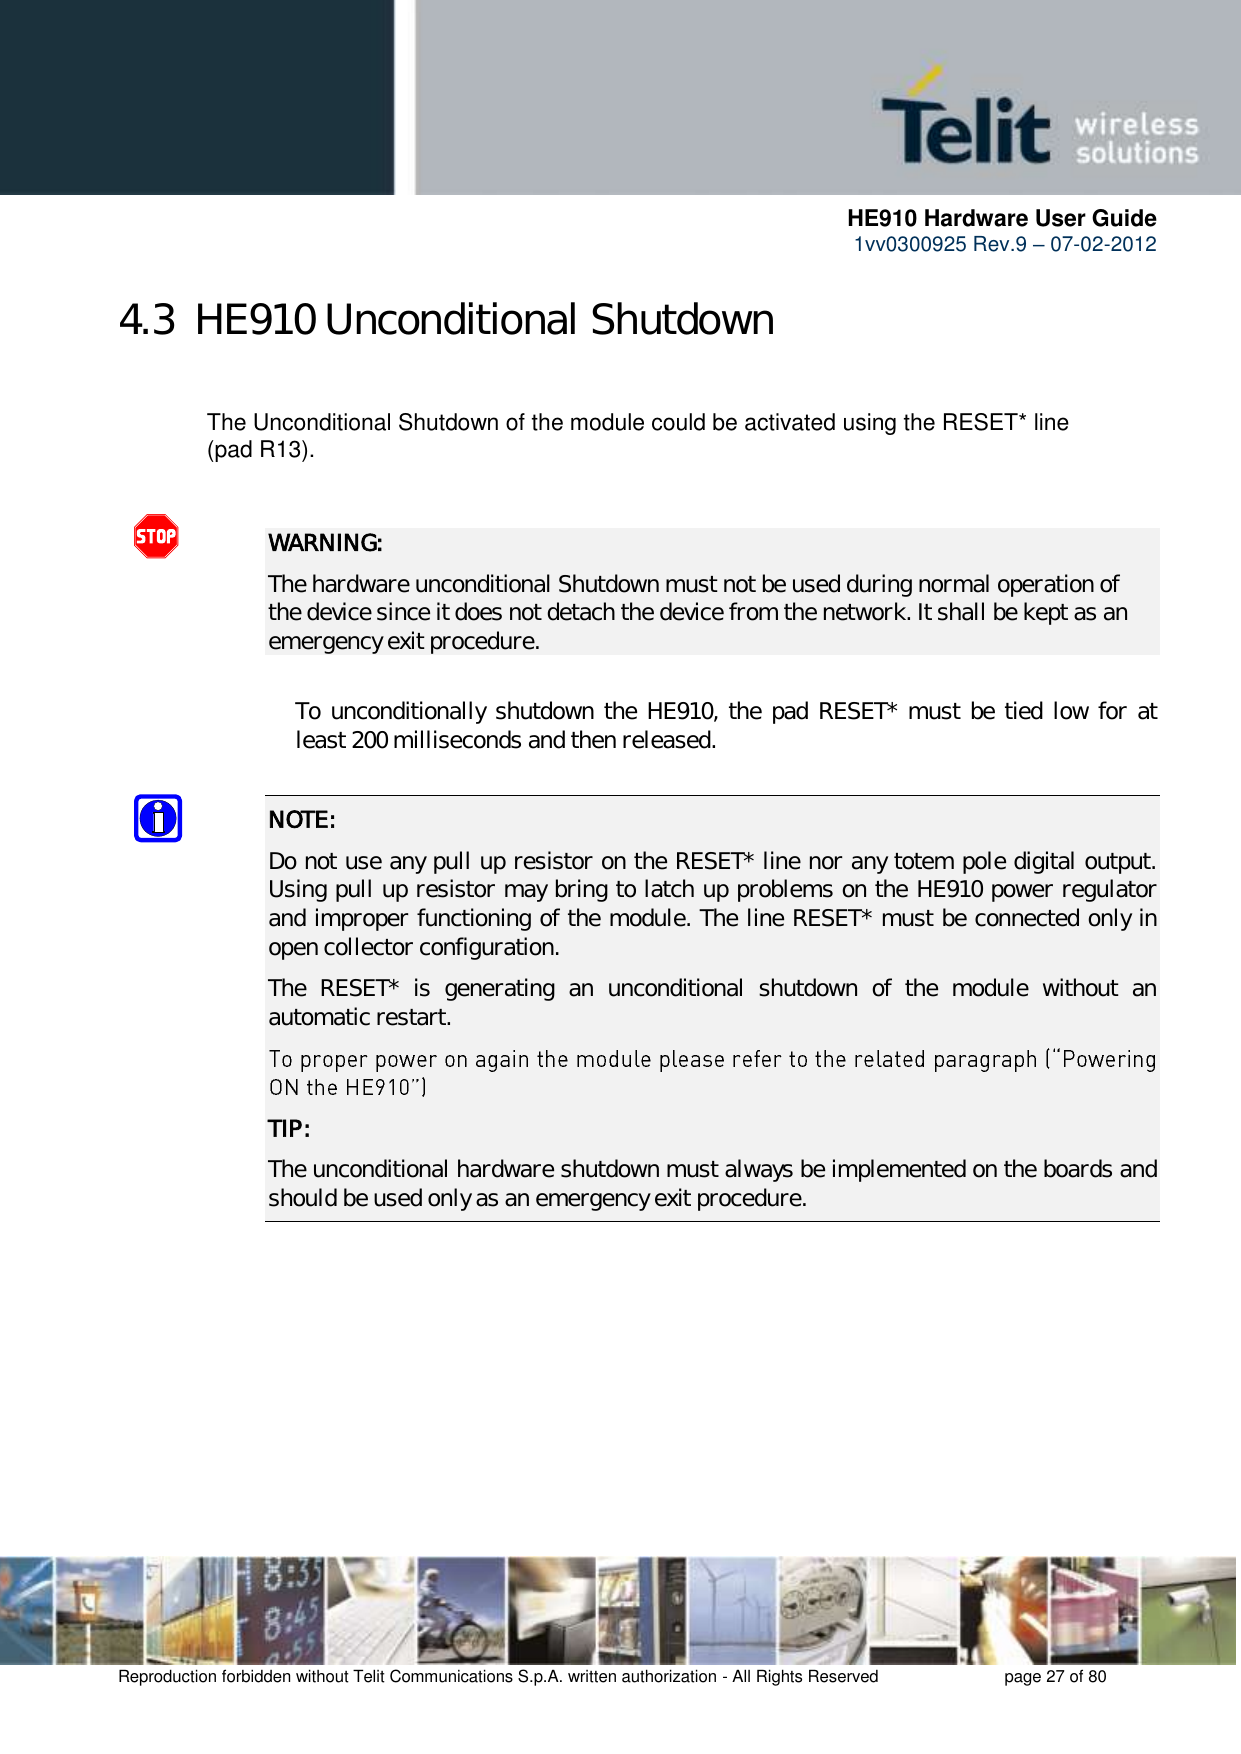      HE910 Hardware User Guide 1vv0300925 Rev.9 – 07-02-2012    Reproduction forbidden without Telit Communications S.p.A. written authorization - All Rights Reserved    page 27 of 80  4.3  HE910 Unconditional Shutdown    The Unconditional Shutdown of the module could be activated using the RESET* line    (pad R13).   WARNING: The hardware unconditional Shutdown must not be used during normal operation of the device since it does not detach the device from the network. It shall be kept as an emergency exit procedure.      To unconditionally shutdown the HE910, the pad RESET* must be tied low for at     least 200 milliseconds and then released.  NOTE:  Do not use any pull up resistor on the RESET* line nor any totem pole digital output. Using pull up resistor may bring to latch up problems on the HE910 power regulator and improper functioning of the module. The line RESET* must be connected only in open collector configuration. The  RESET*  is  generating  an  unconditional  shutdown  of  the  module  without  an automatic restart.  TIP: The unconditional hardware shutdown must always be implemented on the boards and should be used only as an emergency exit procedure.       